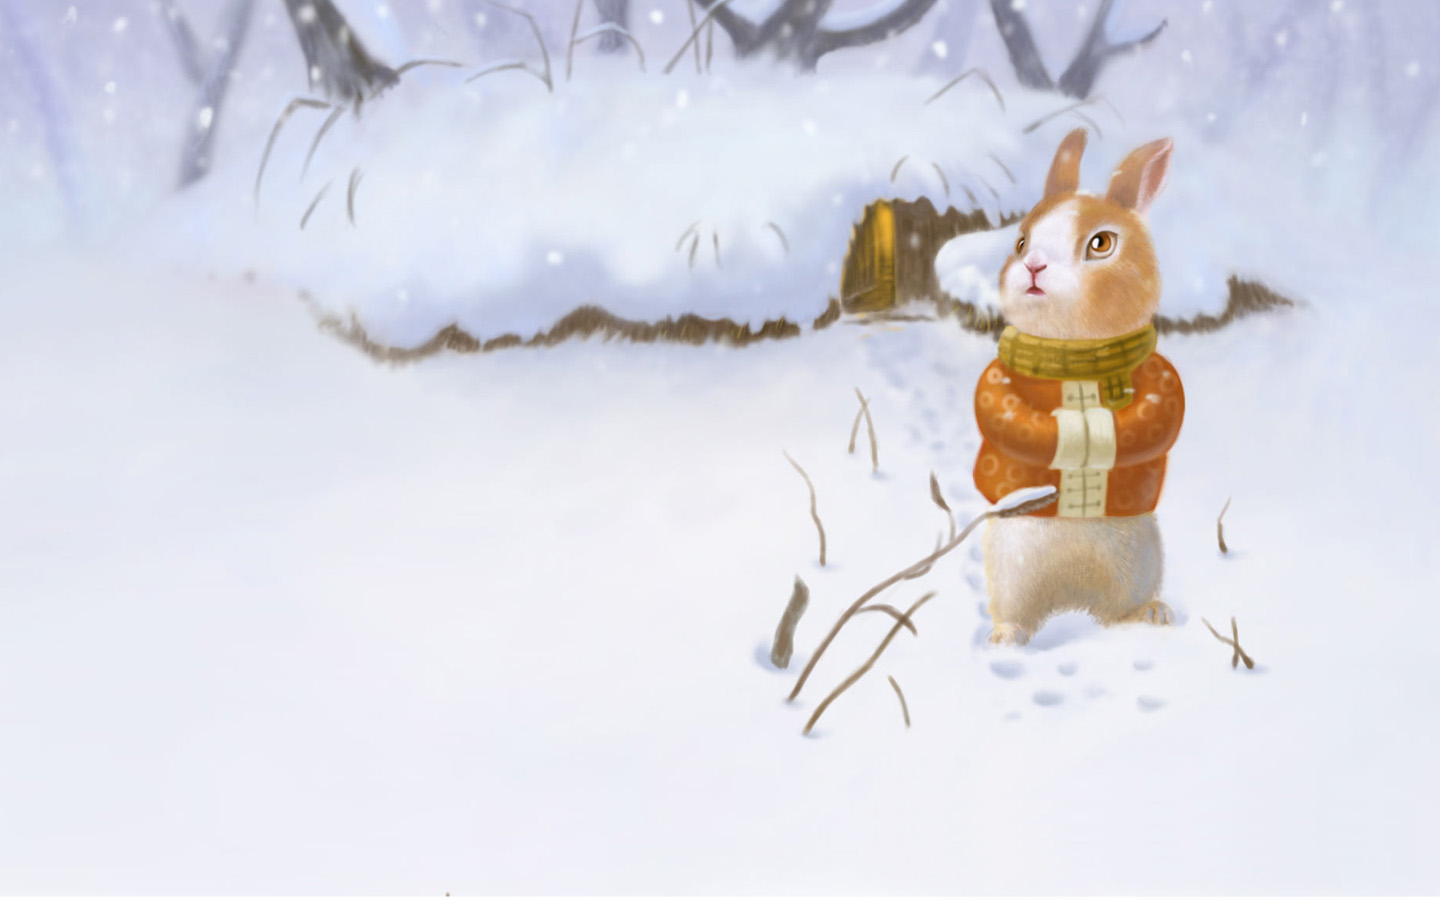 The rabbit wallpaper waiting in the snow